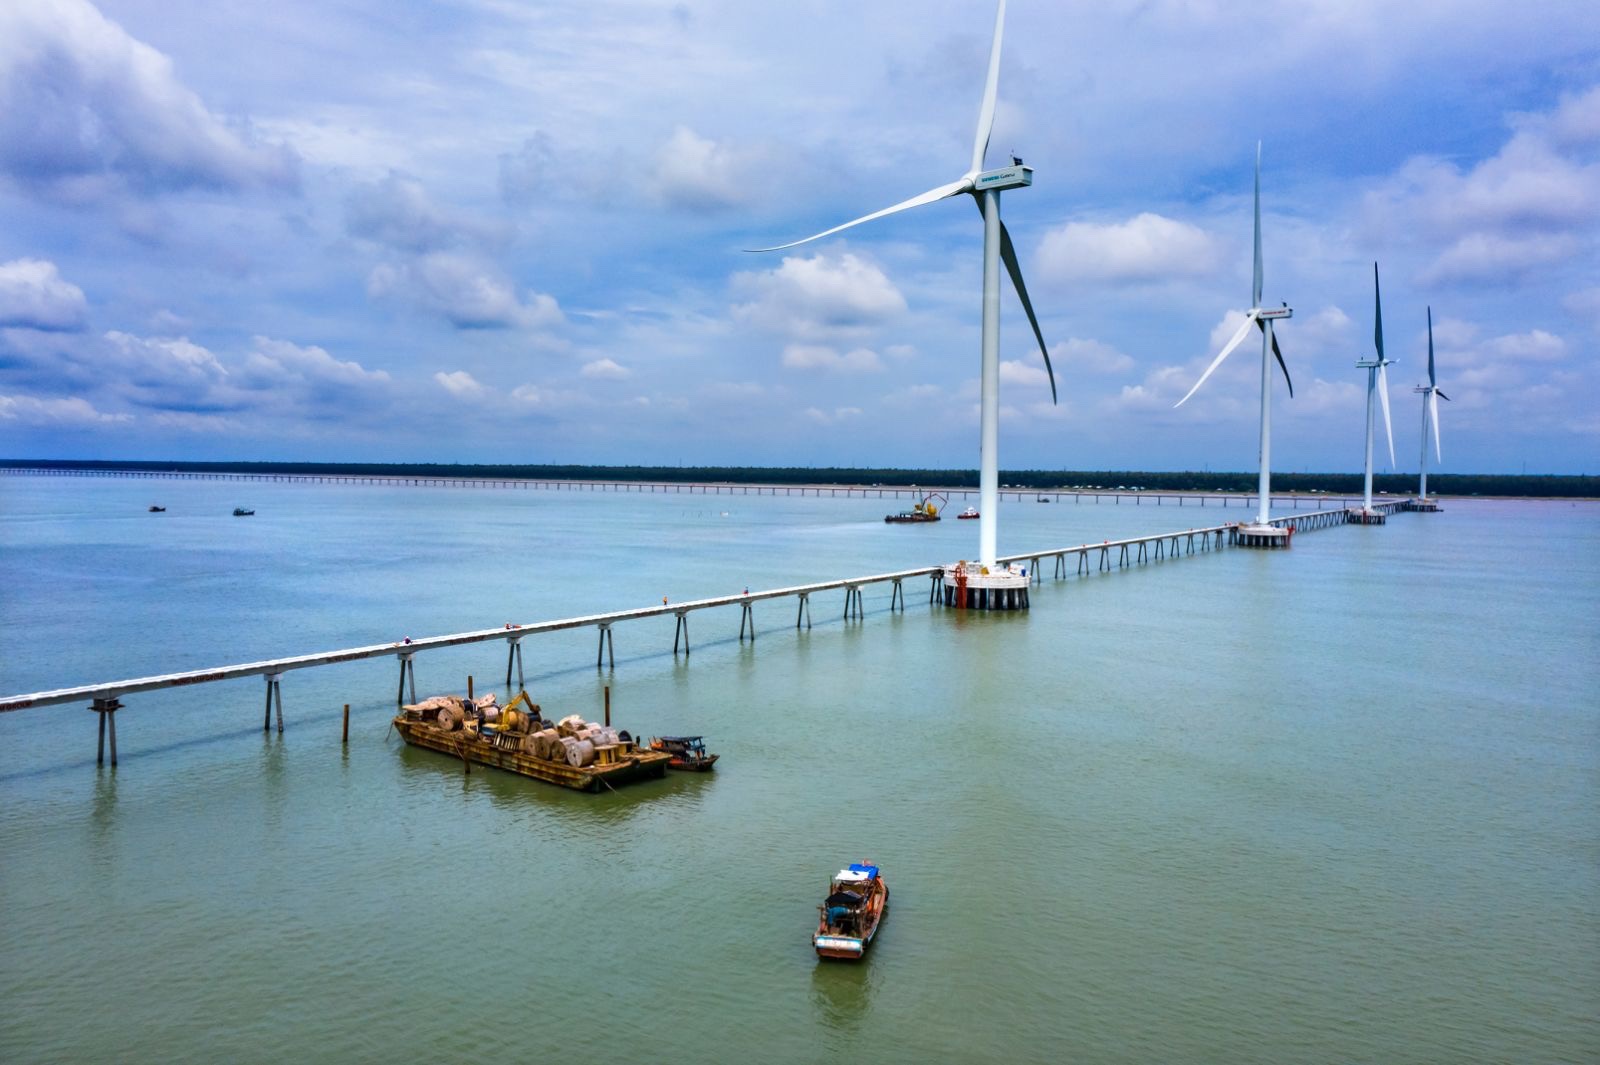 TRUNGNAM COMPLETES FIRST OFFSHORE WIND POWER PROJECT IN TRA VINH